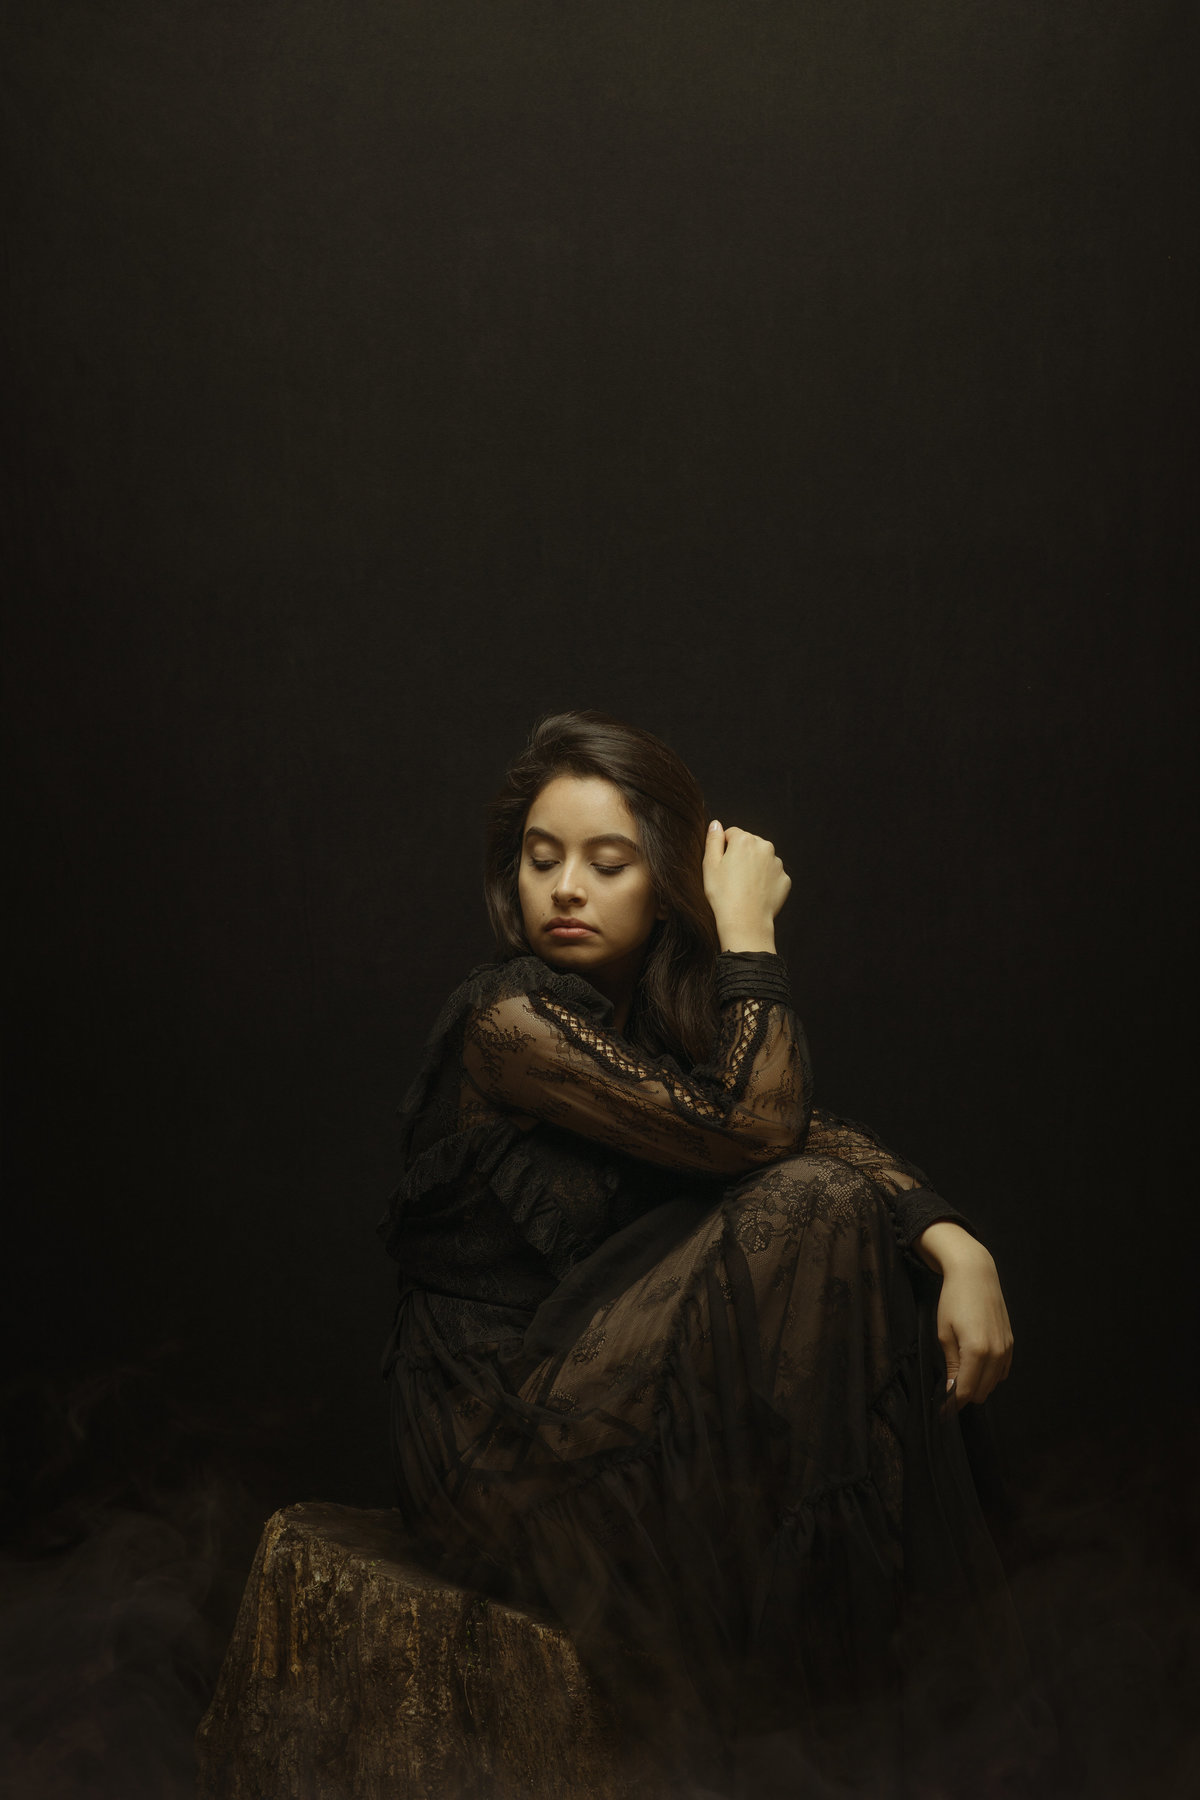 Portrait Photo Of Young Woman In Black Dress Sitting On a Wood Los Angeles